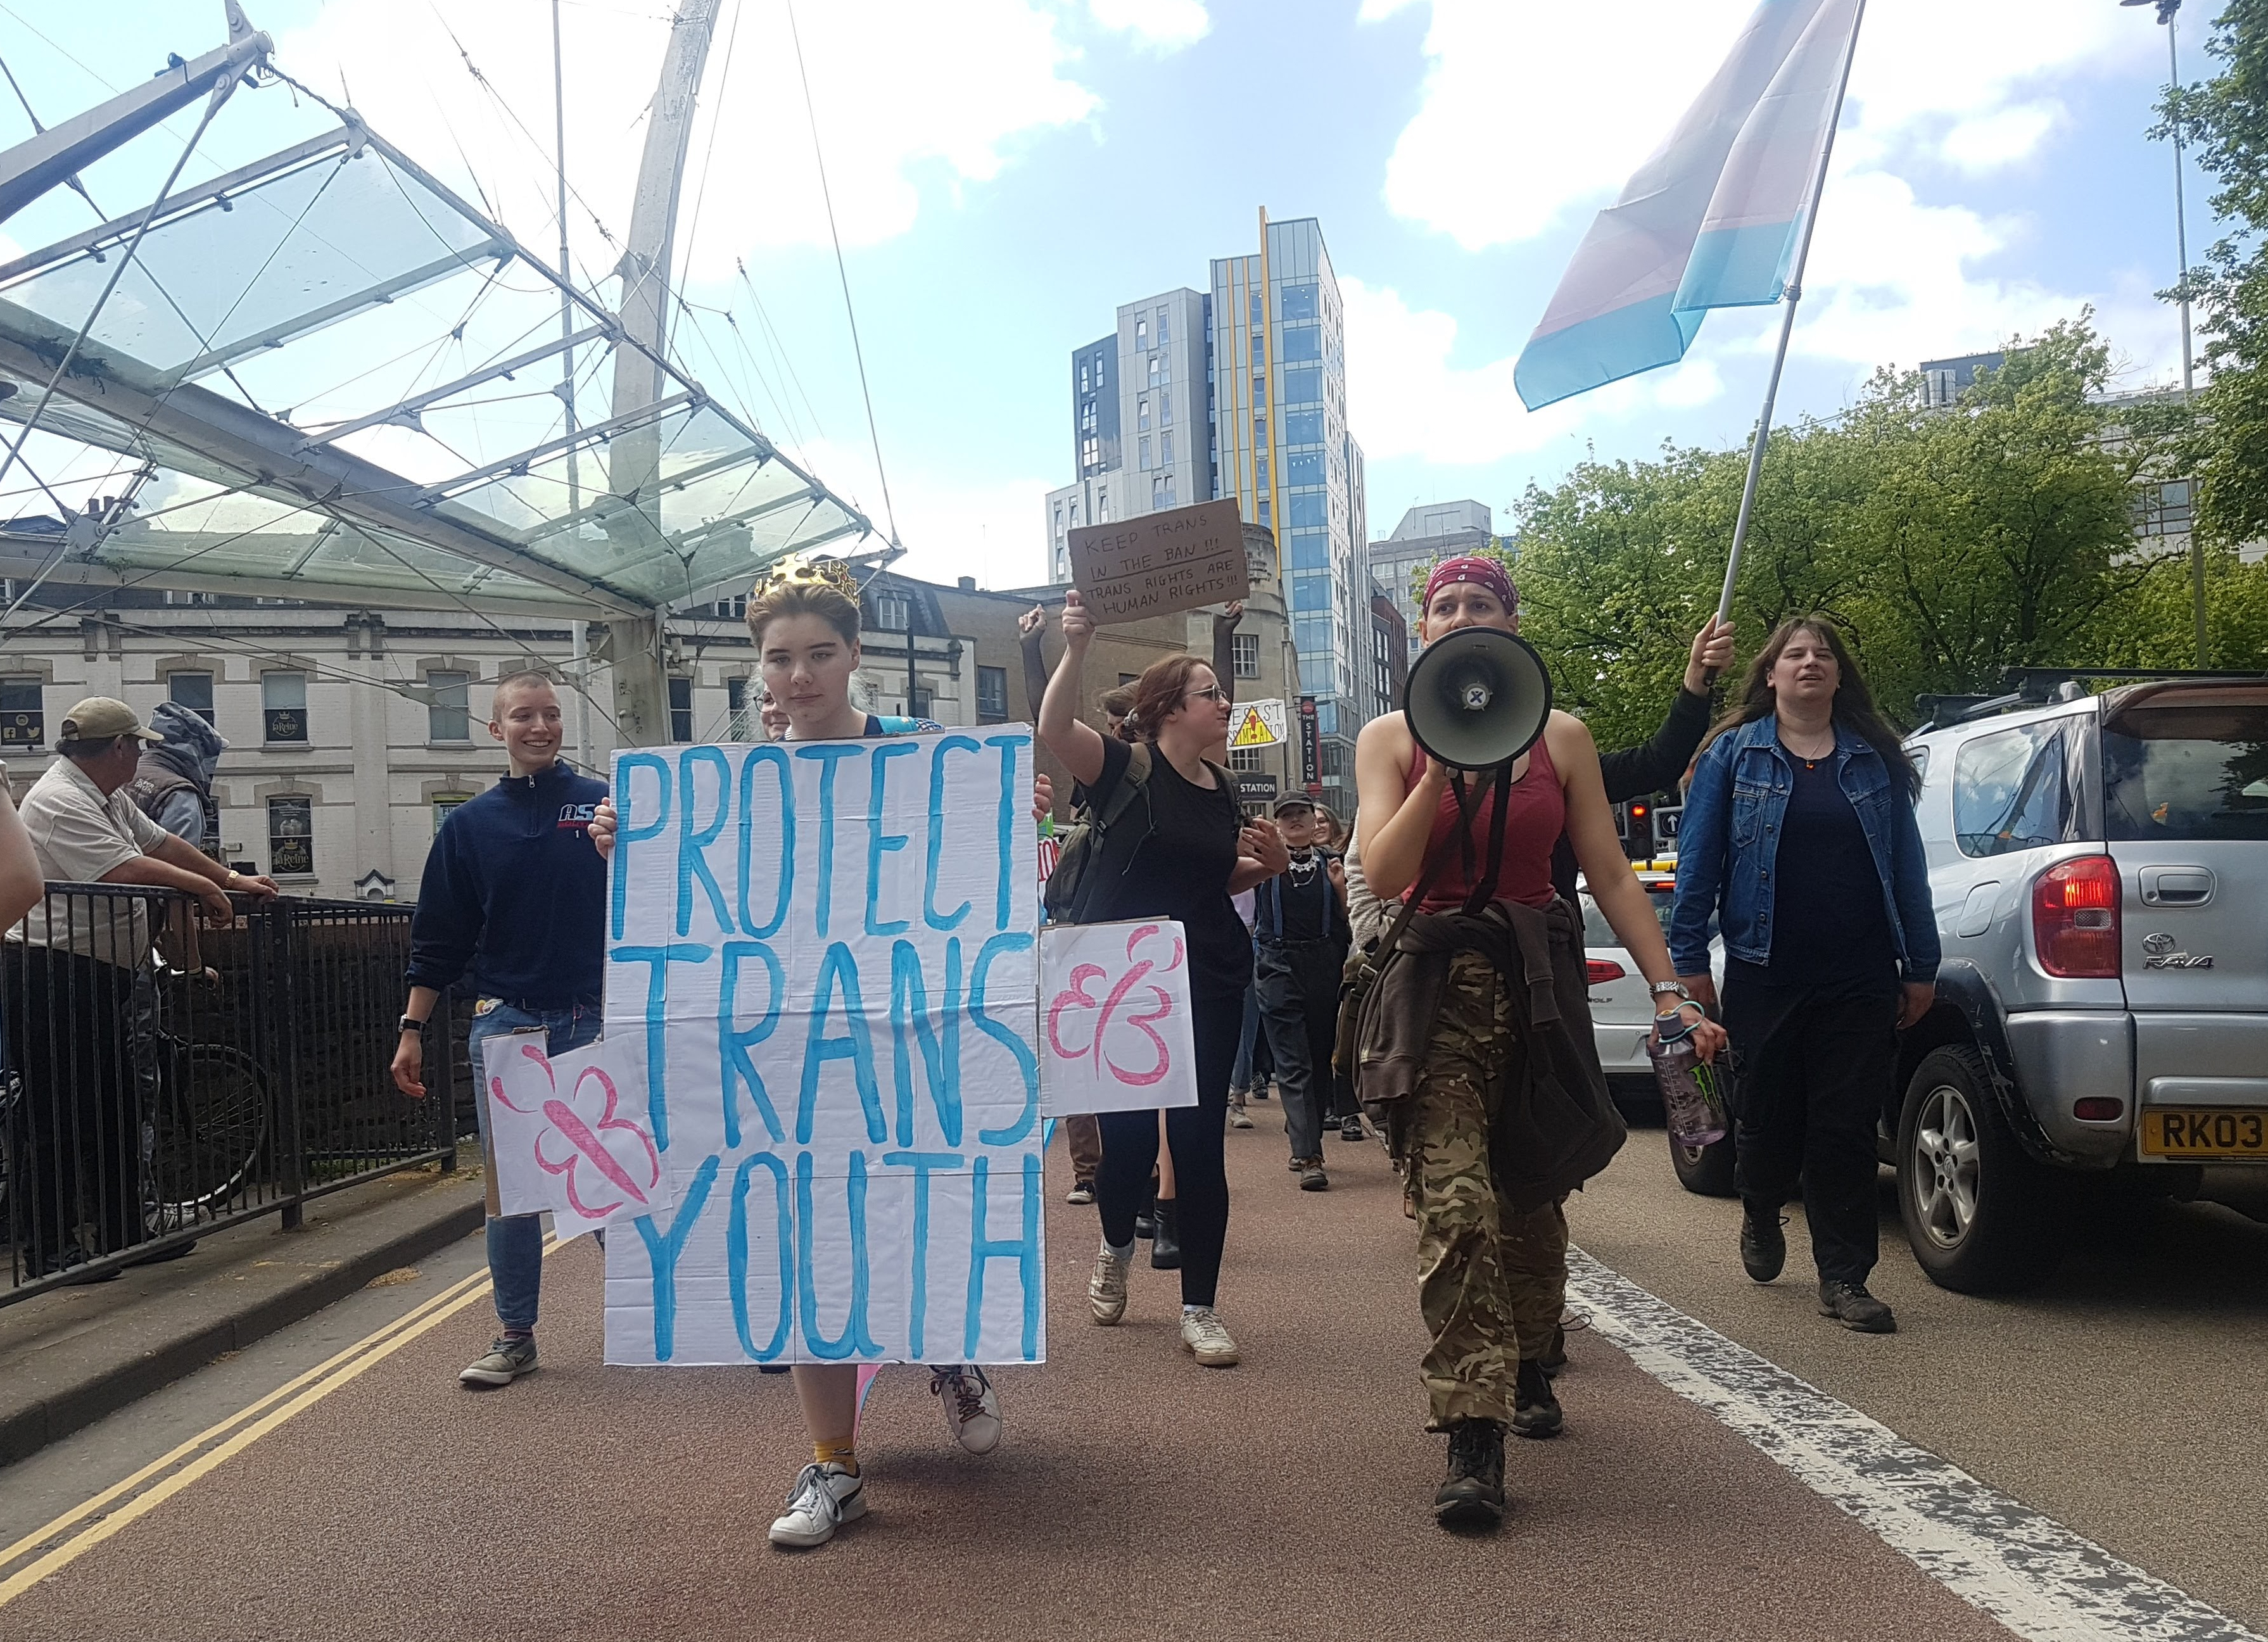 A protester holds a large placard reading "Protect Trans Youth"